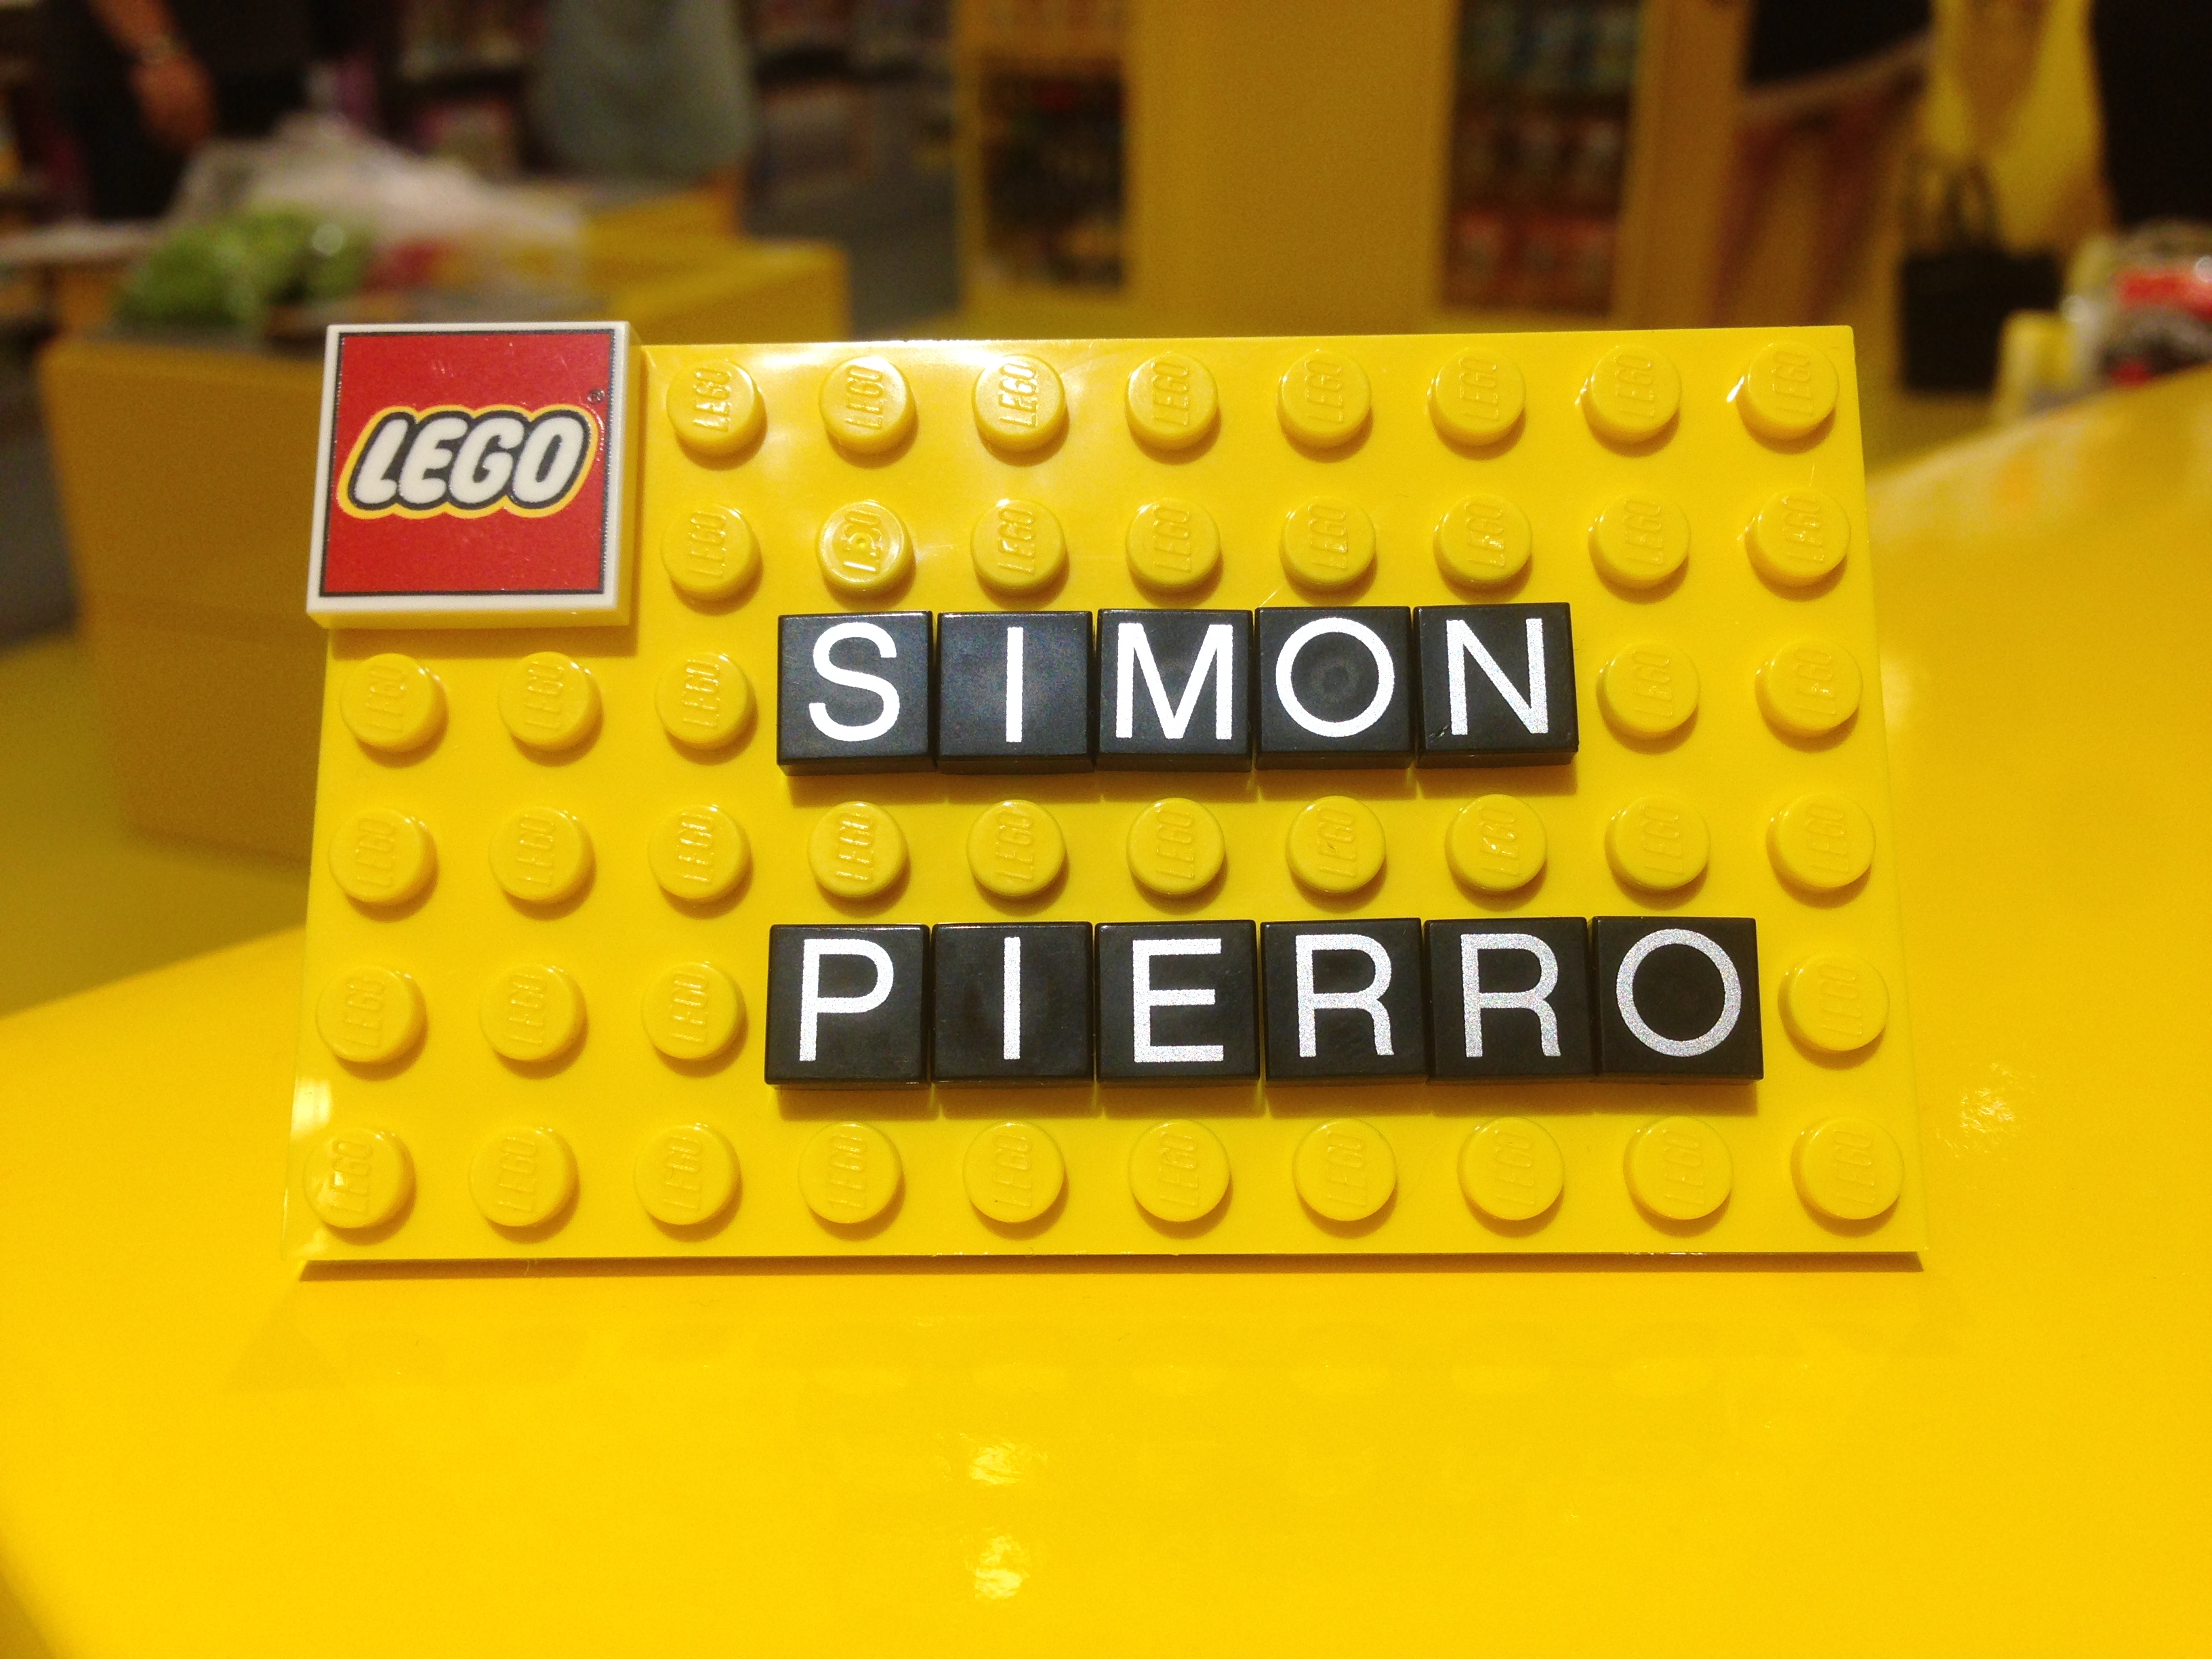 My name on a LEGO board